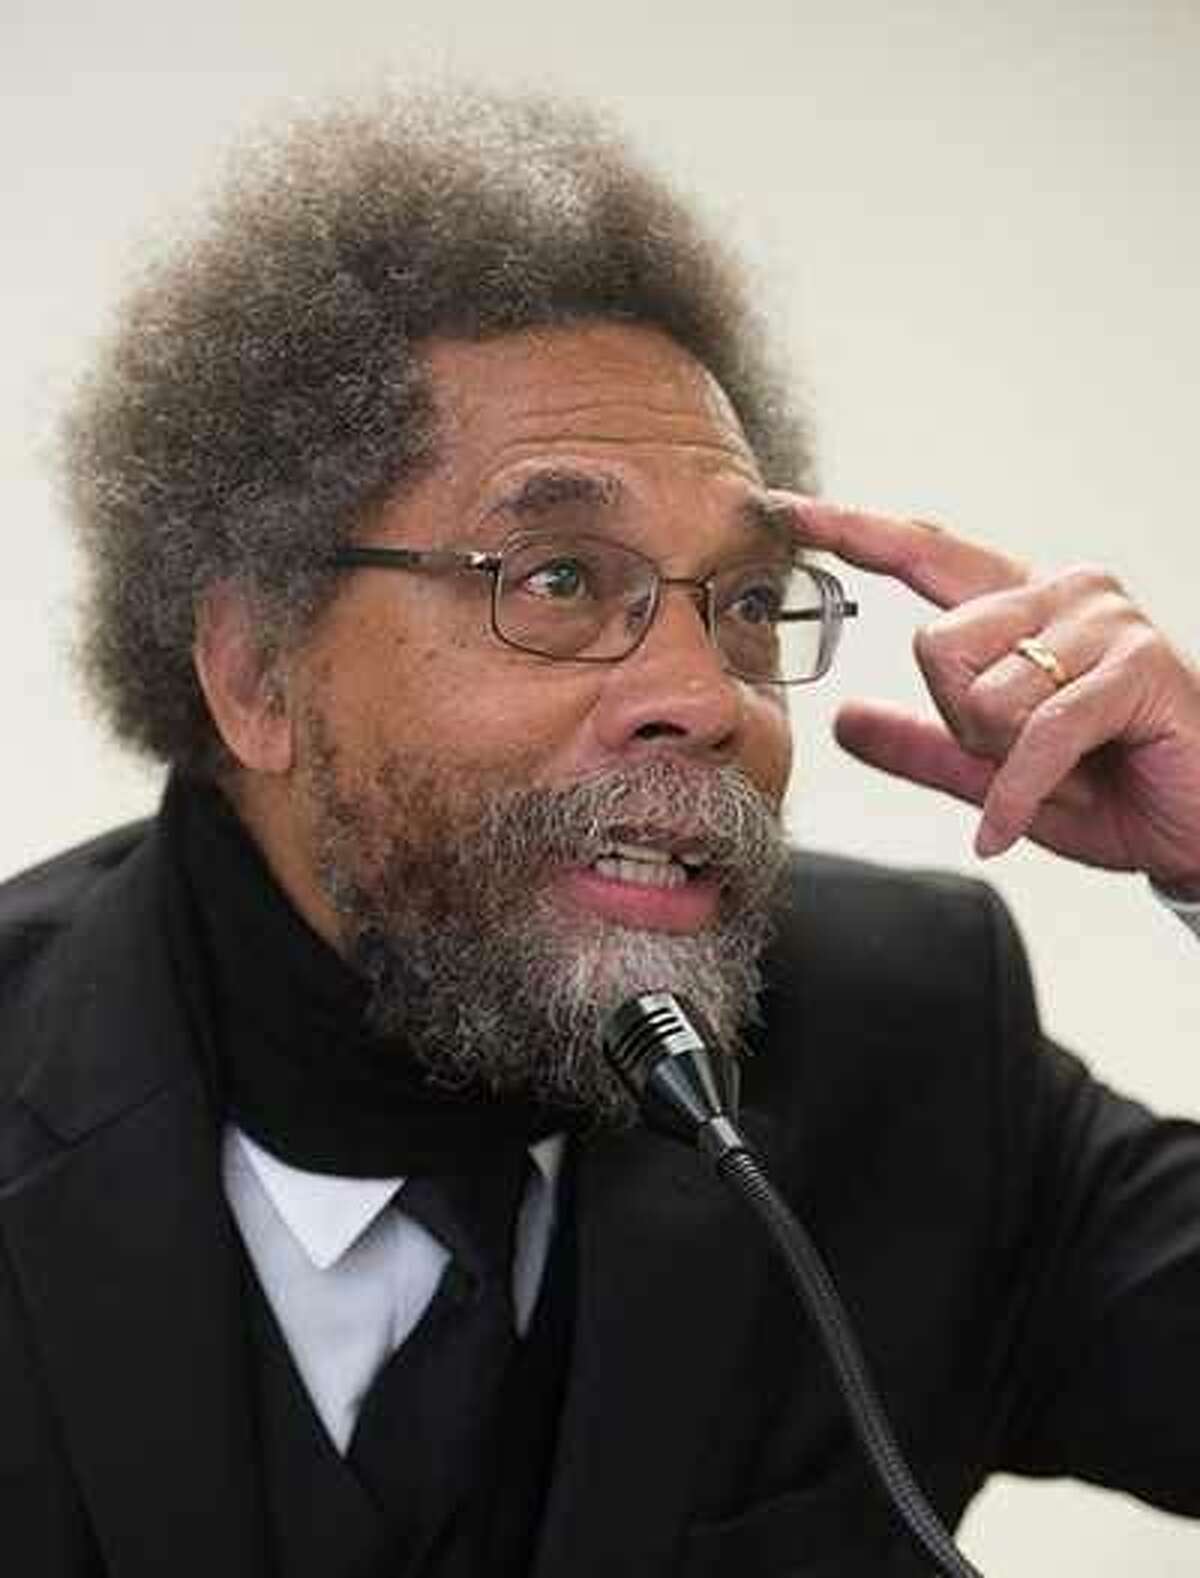 Dr. Cornel West, well-known political and social activist, Harvard University professor, best-selling author and theologian, spoke at the SIUE East St. Louis Center on Thursday, May 17.